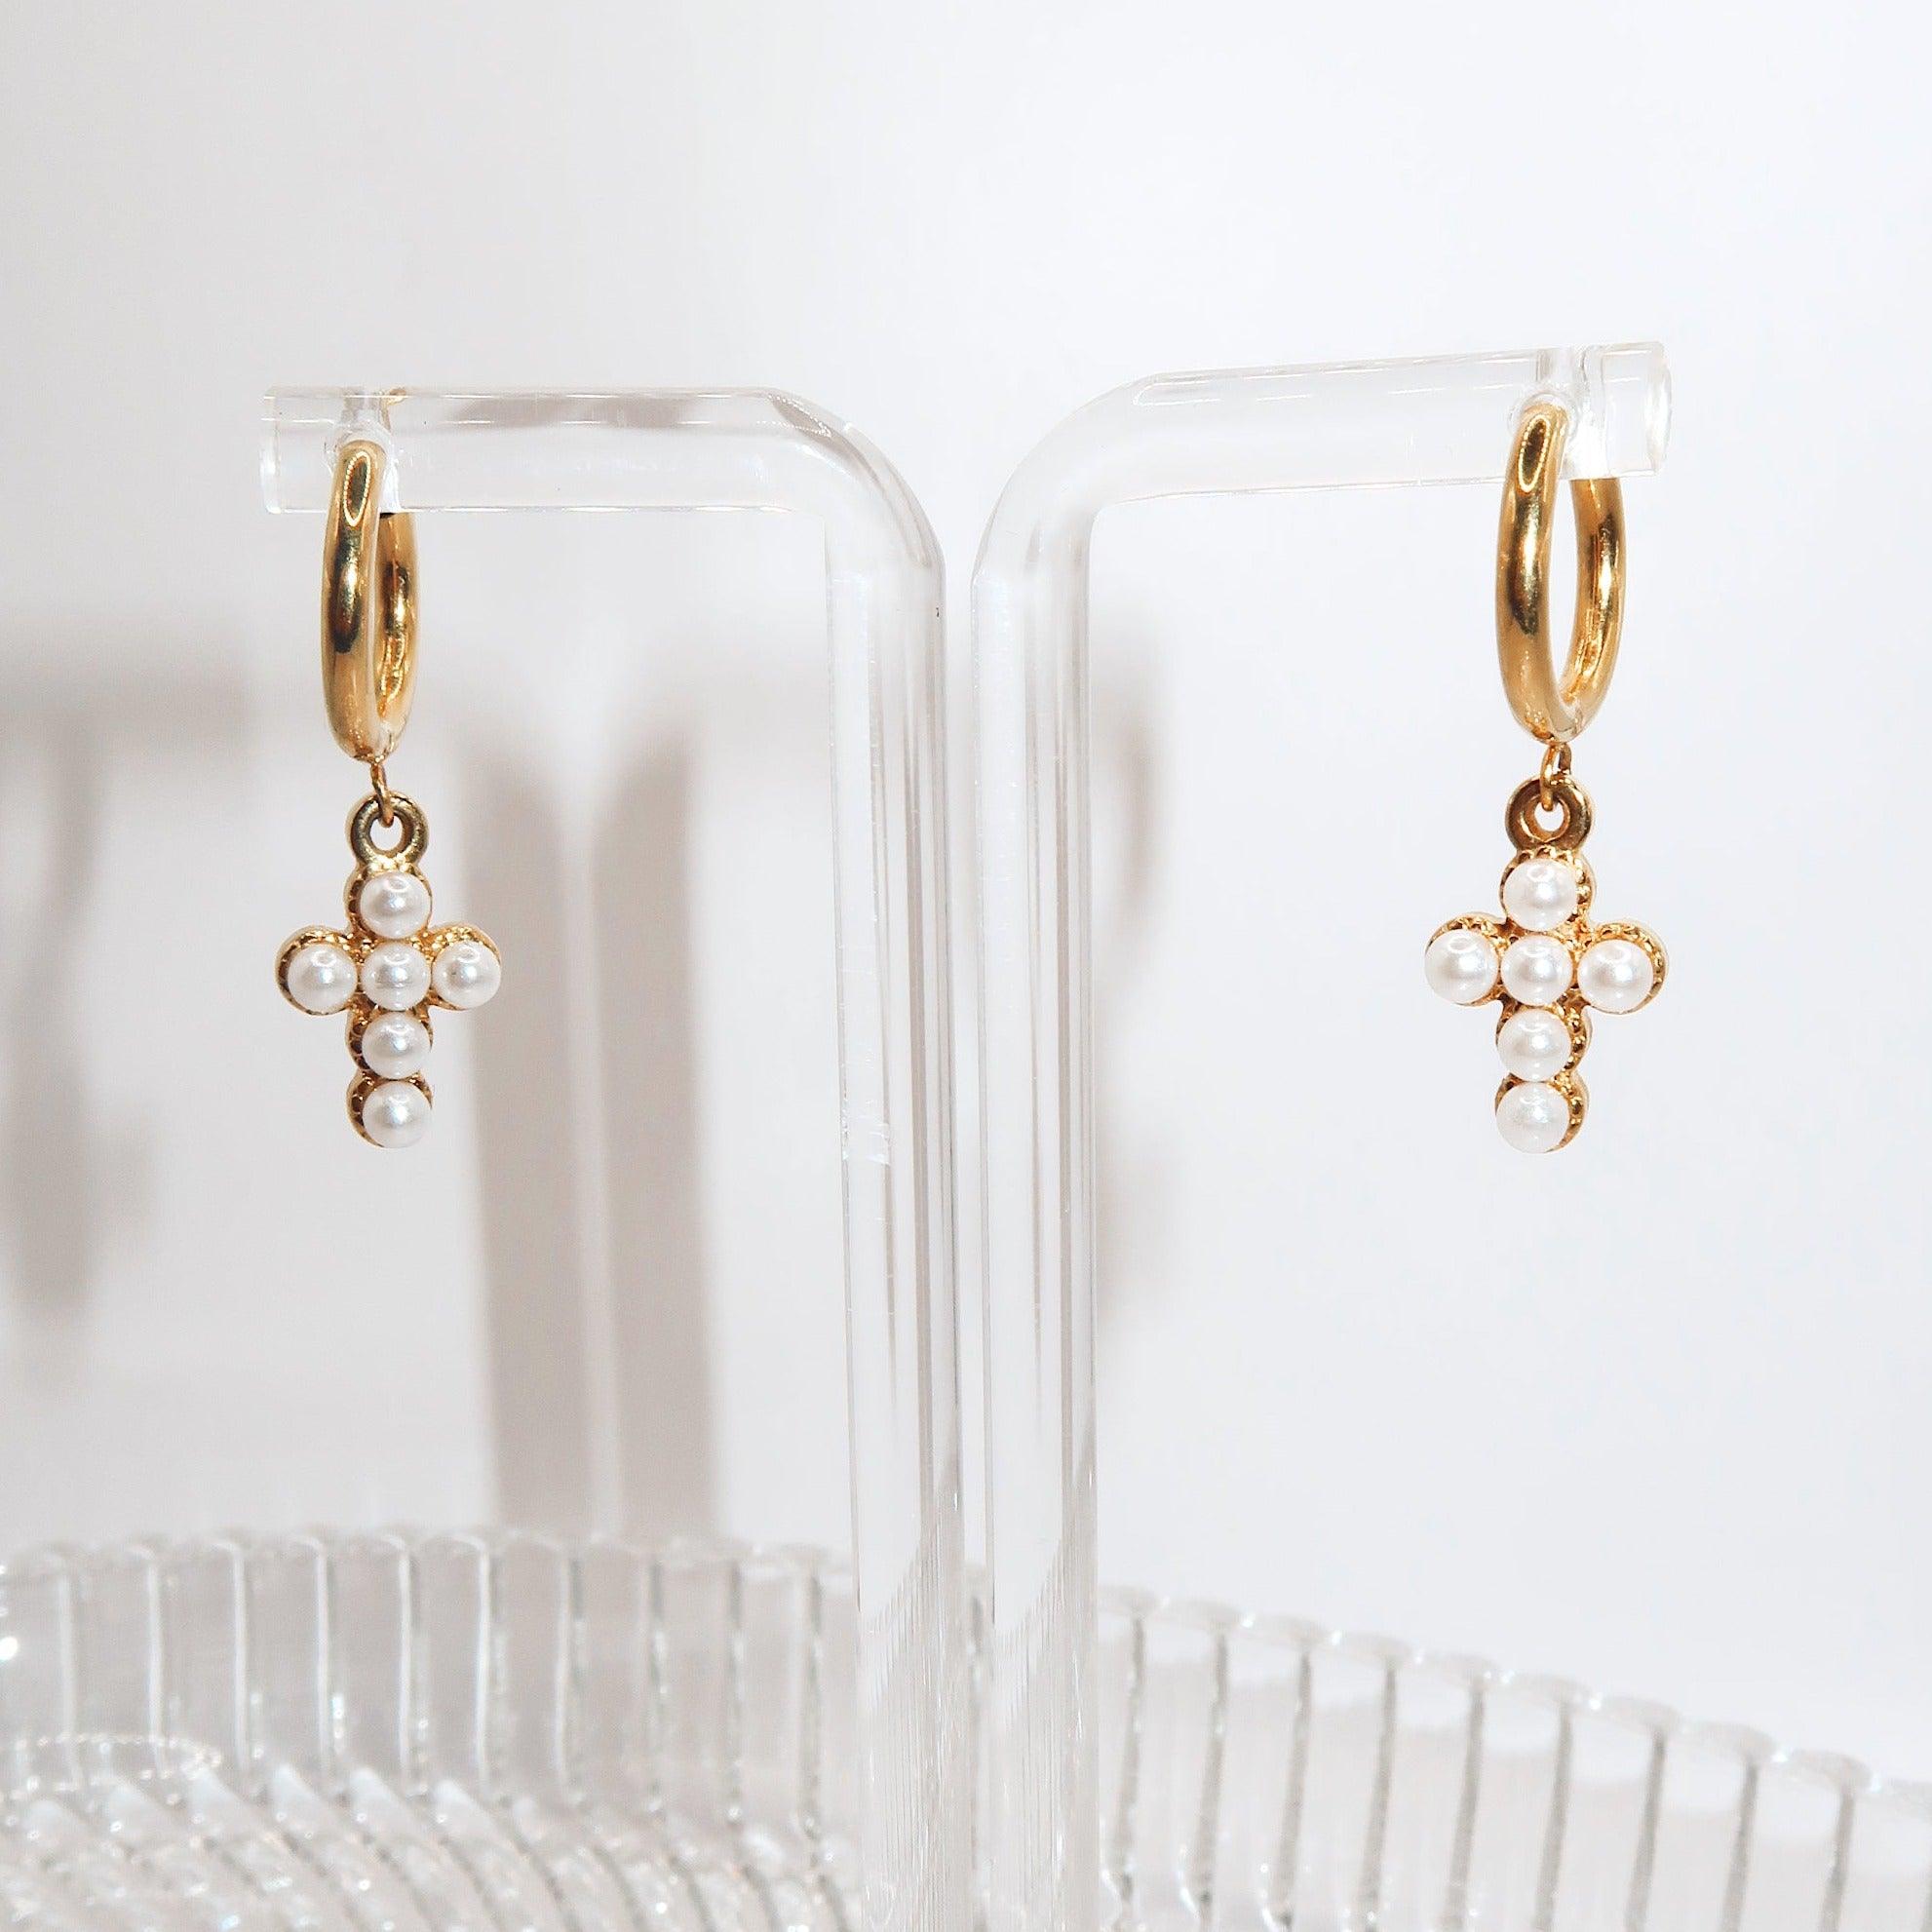 MARIA - 18K PVD Gold Plated Freshwater Pearl Cross Hoop Earrings - Mixed Metals